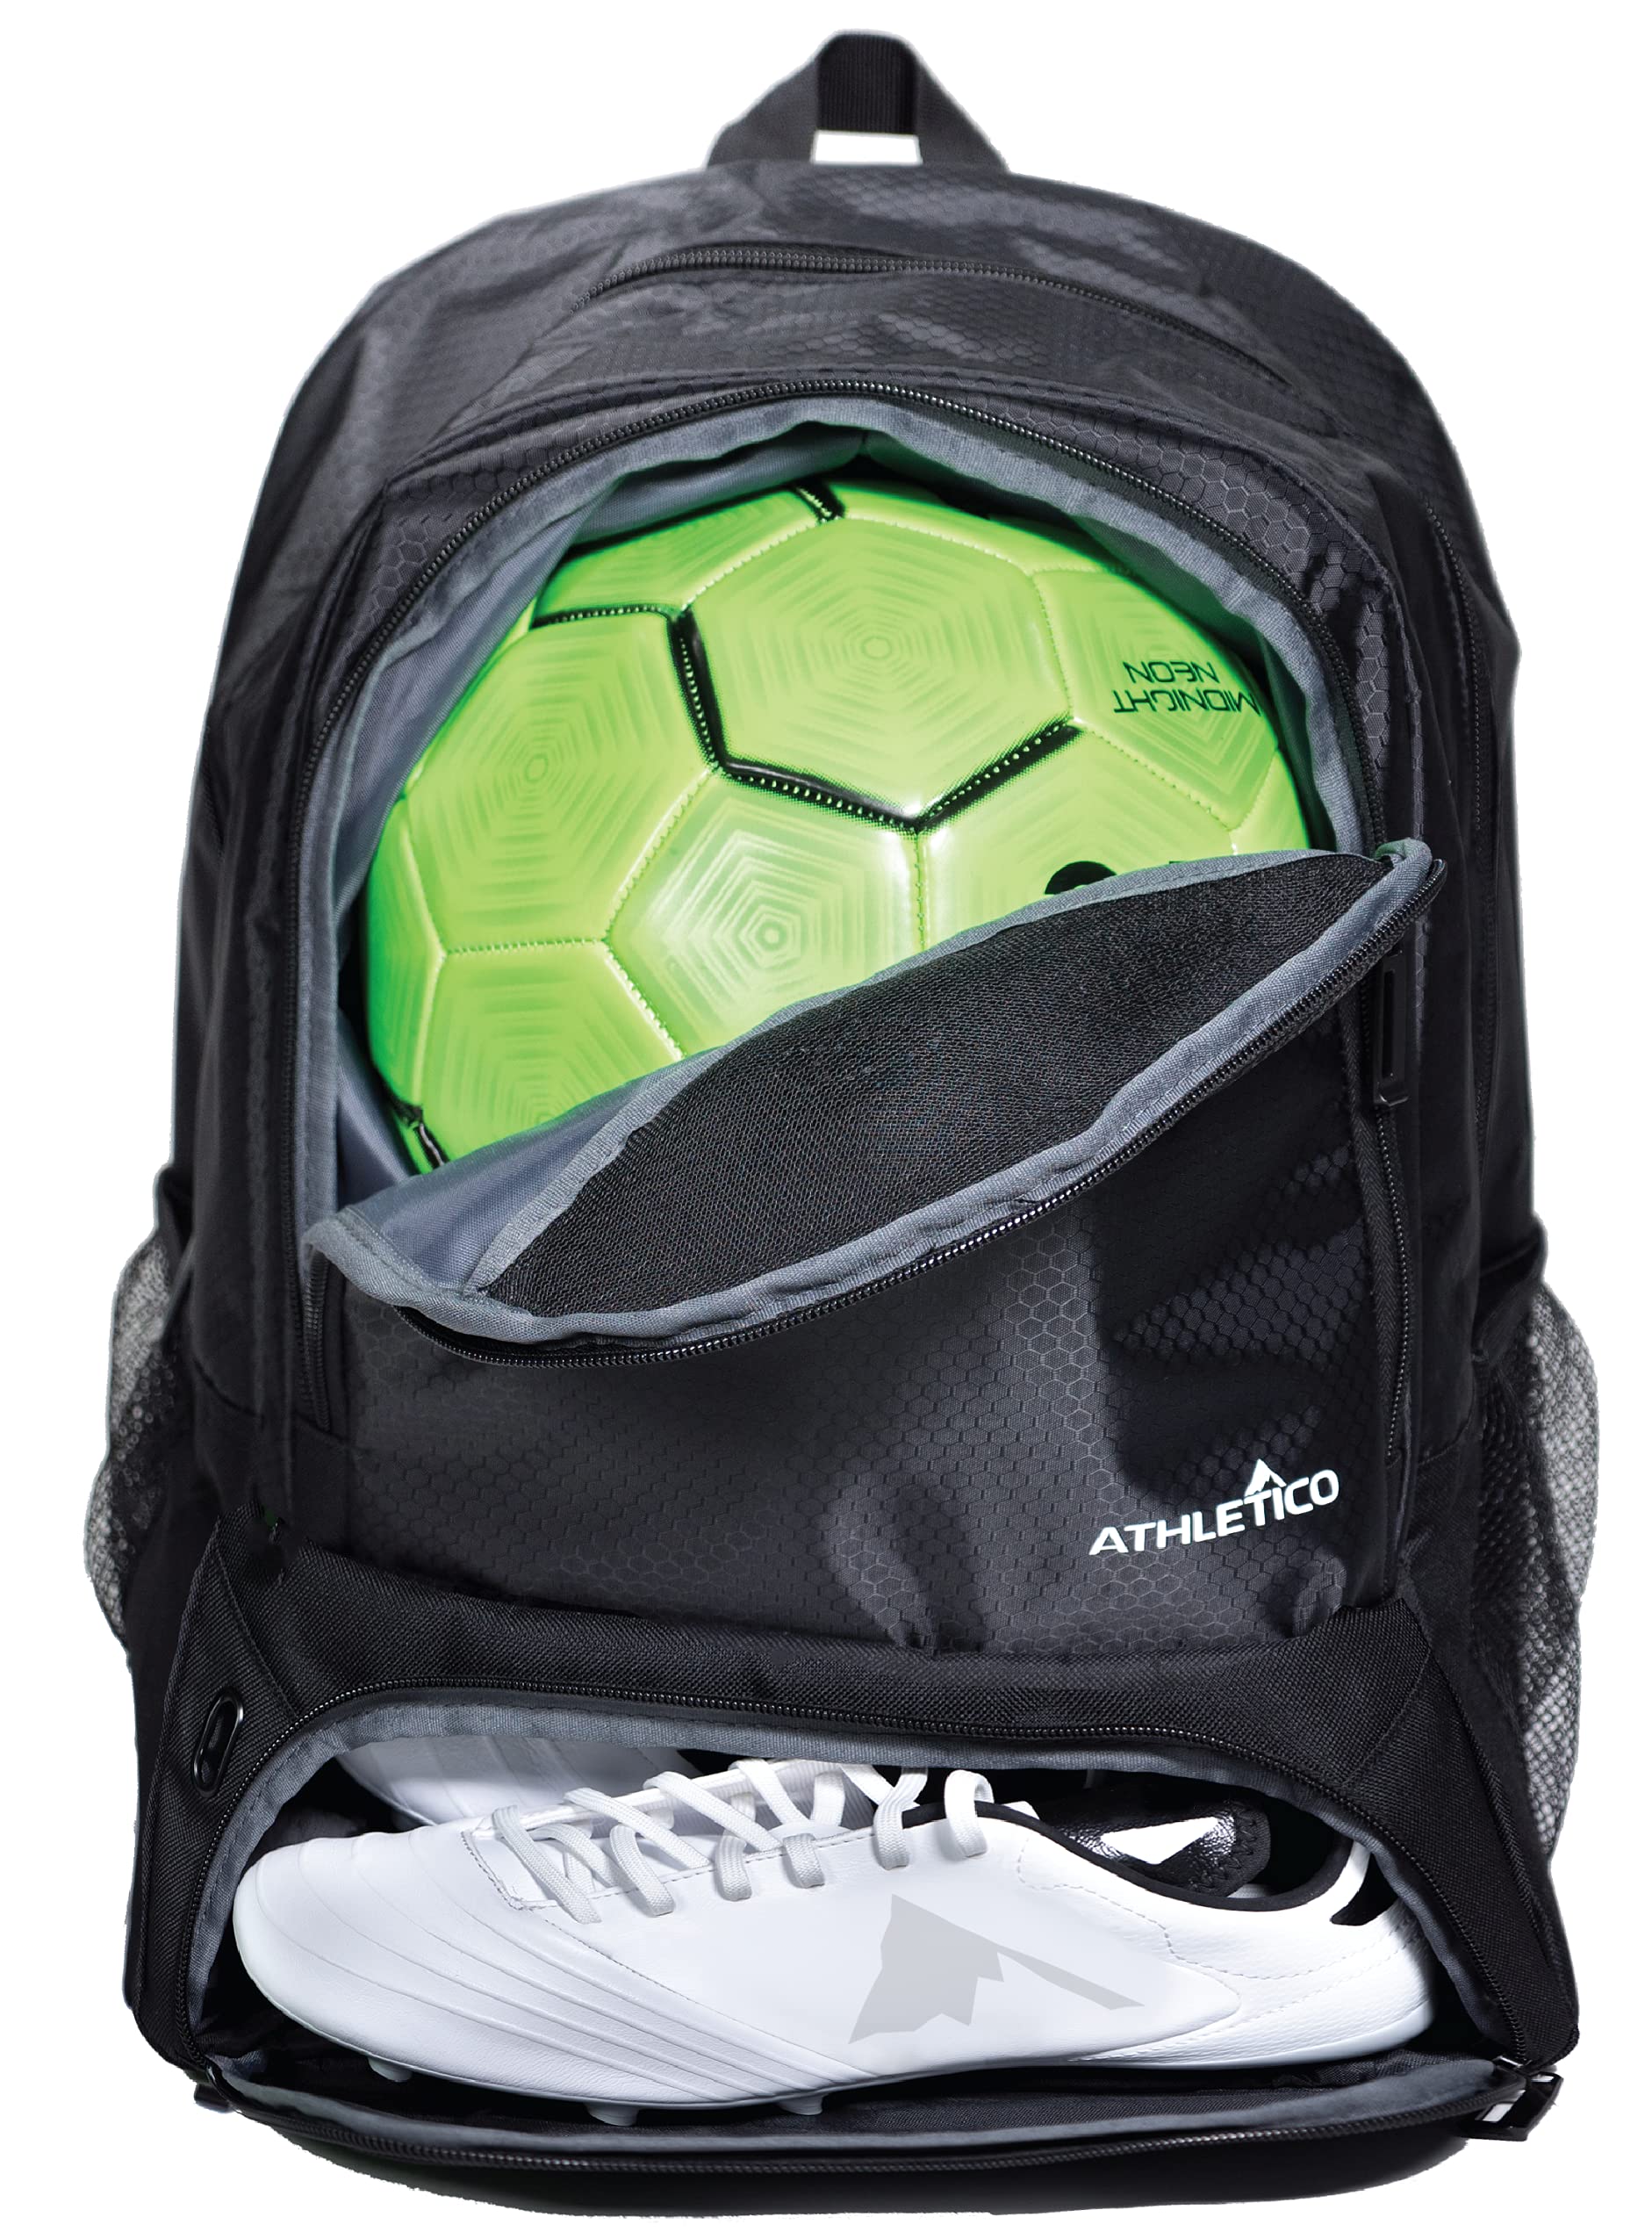 Athletico Youth Soccer Bag - Soccer Backpack & Bags for Basketball, Volleyball & Football | Includes Separate Cleat and Ball Compartment  - Acceptable